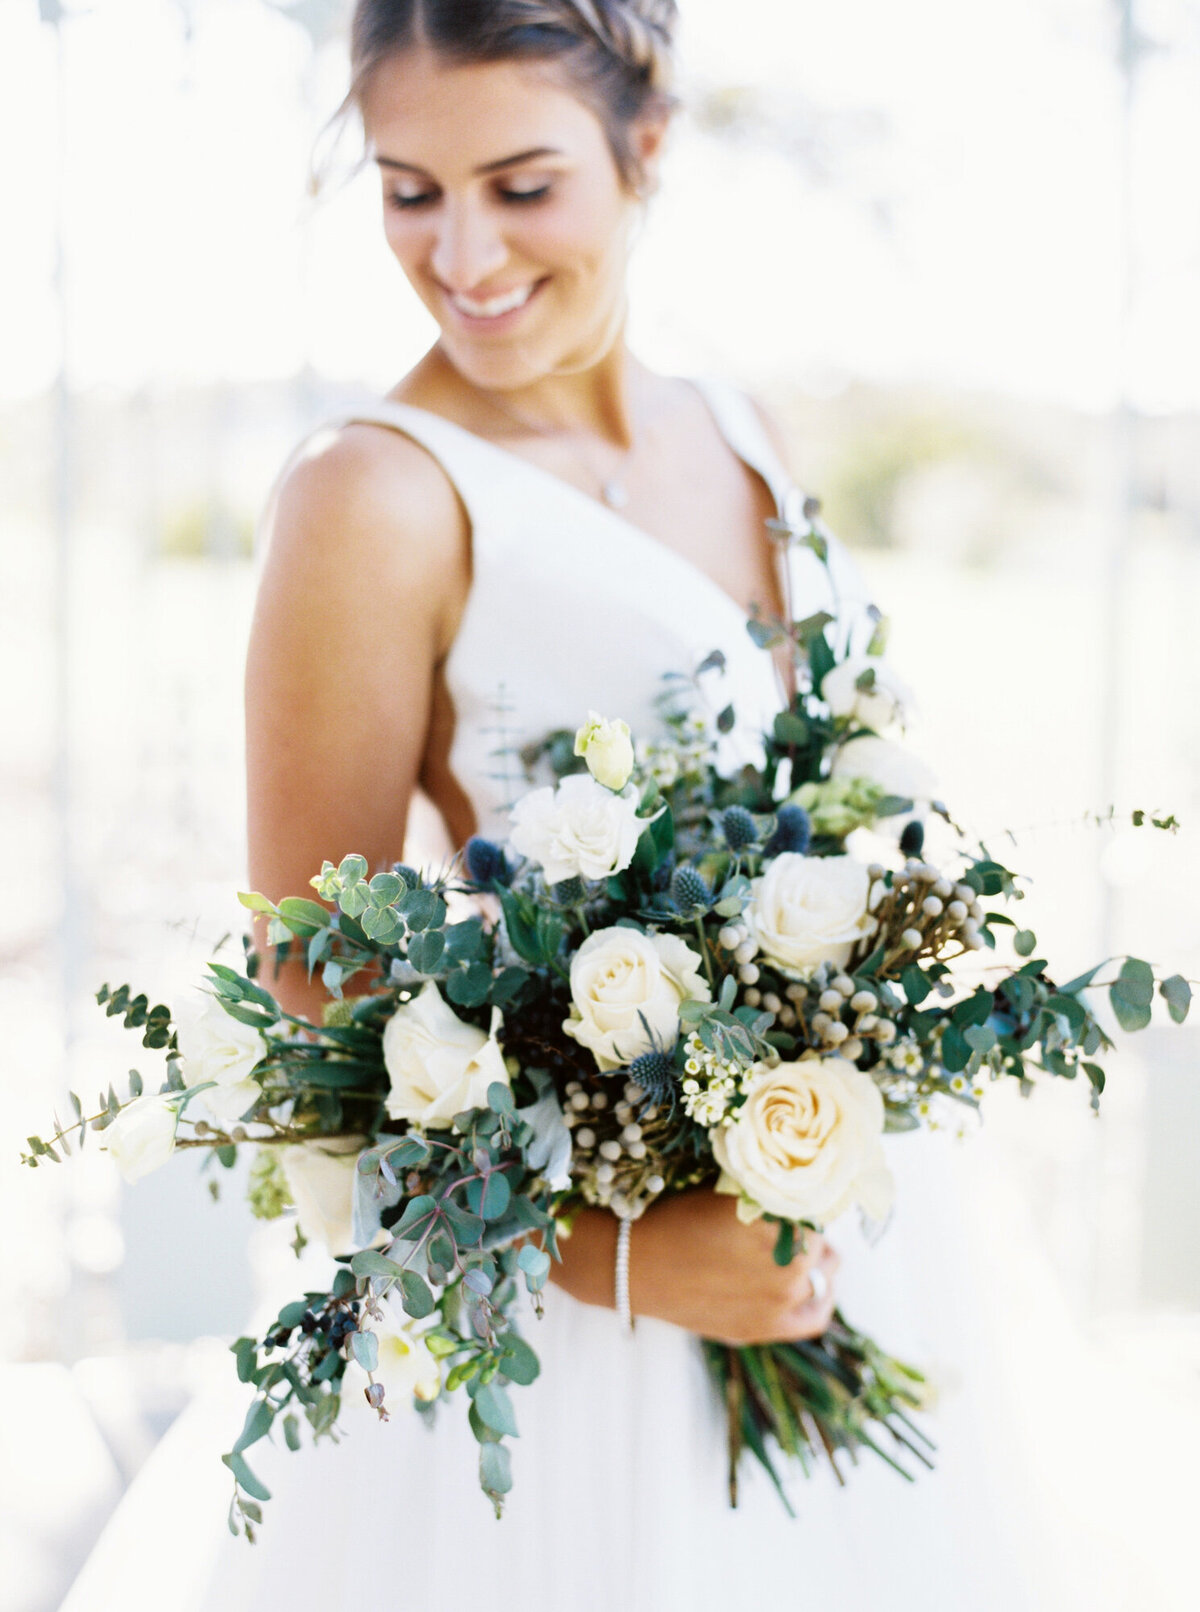 Bride holding white and cream bouquet